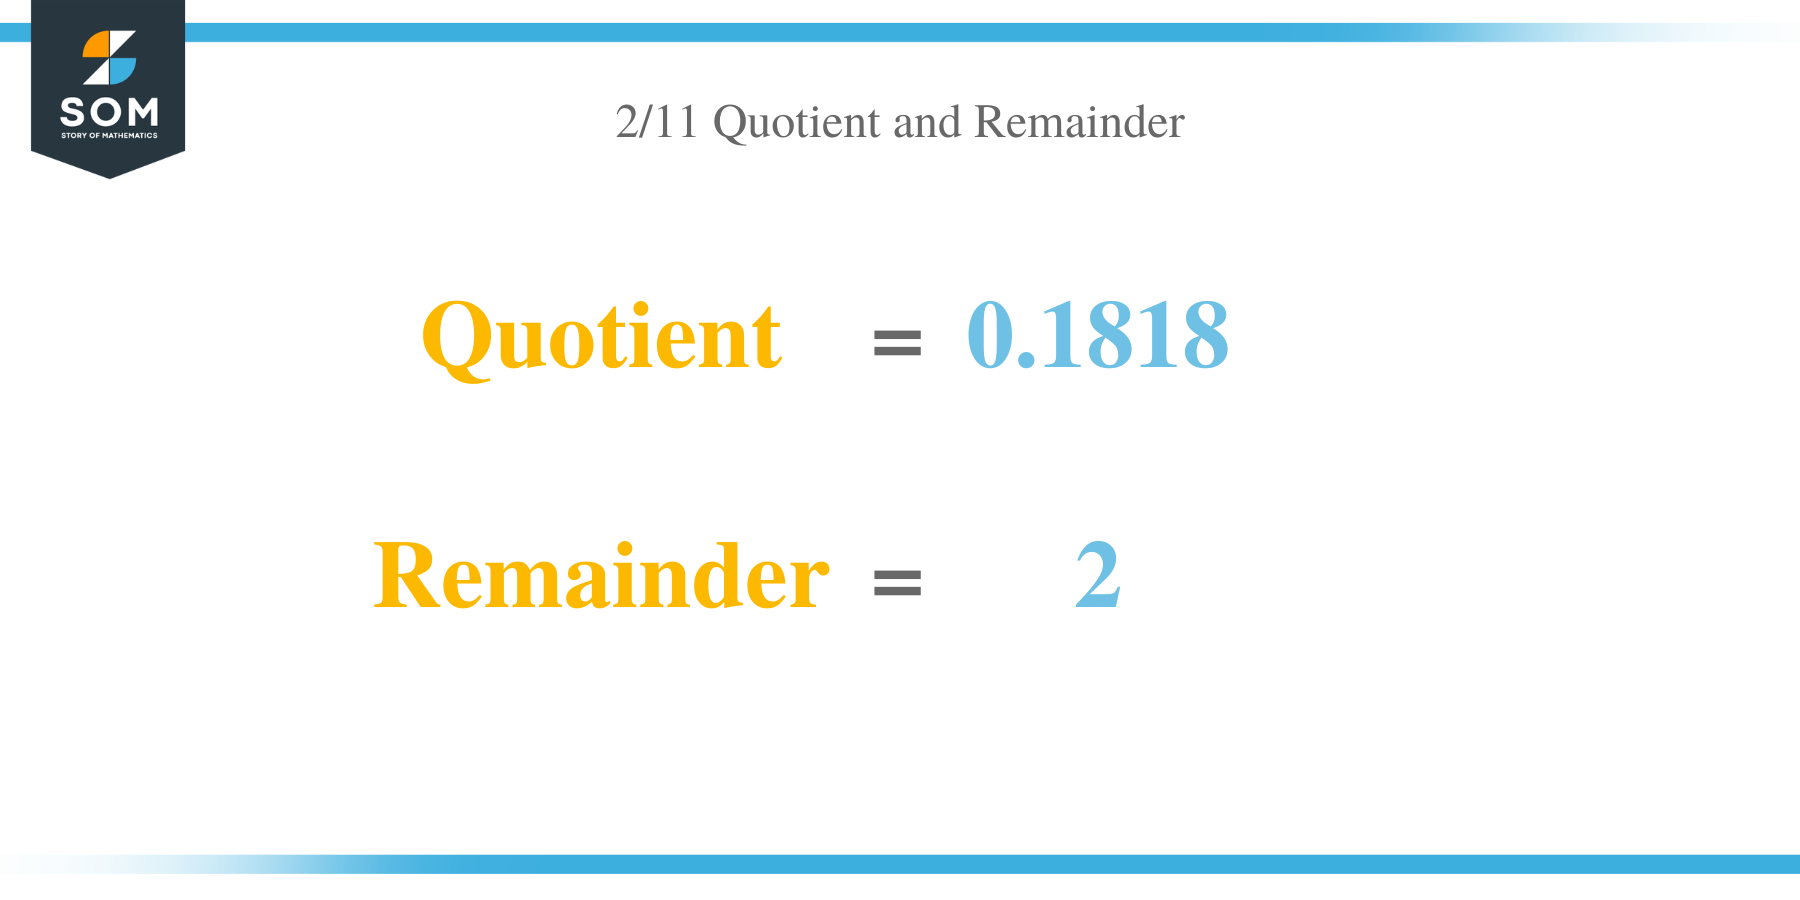 Quotient and Remainer of 2 per 11